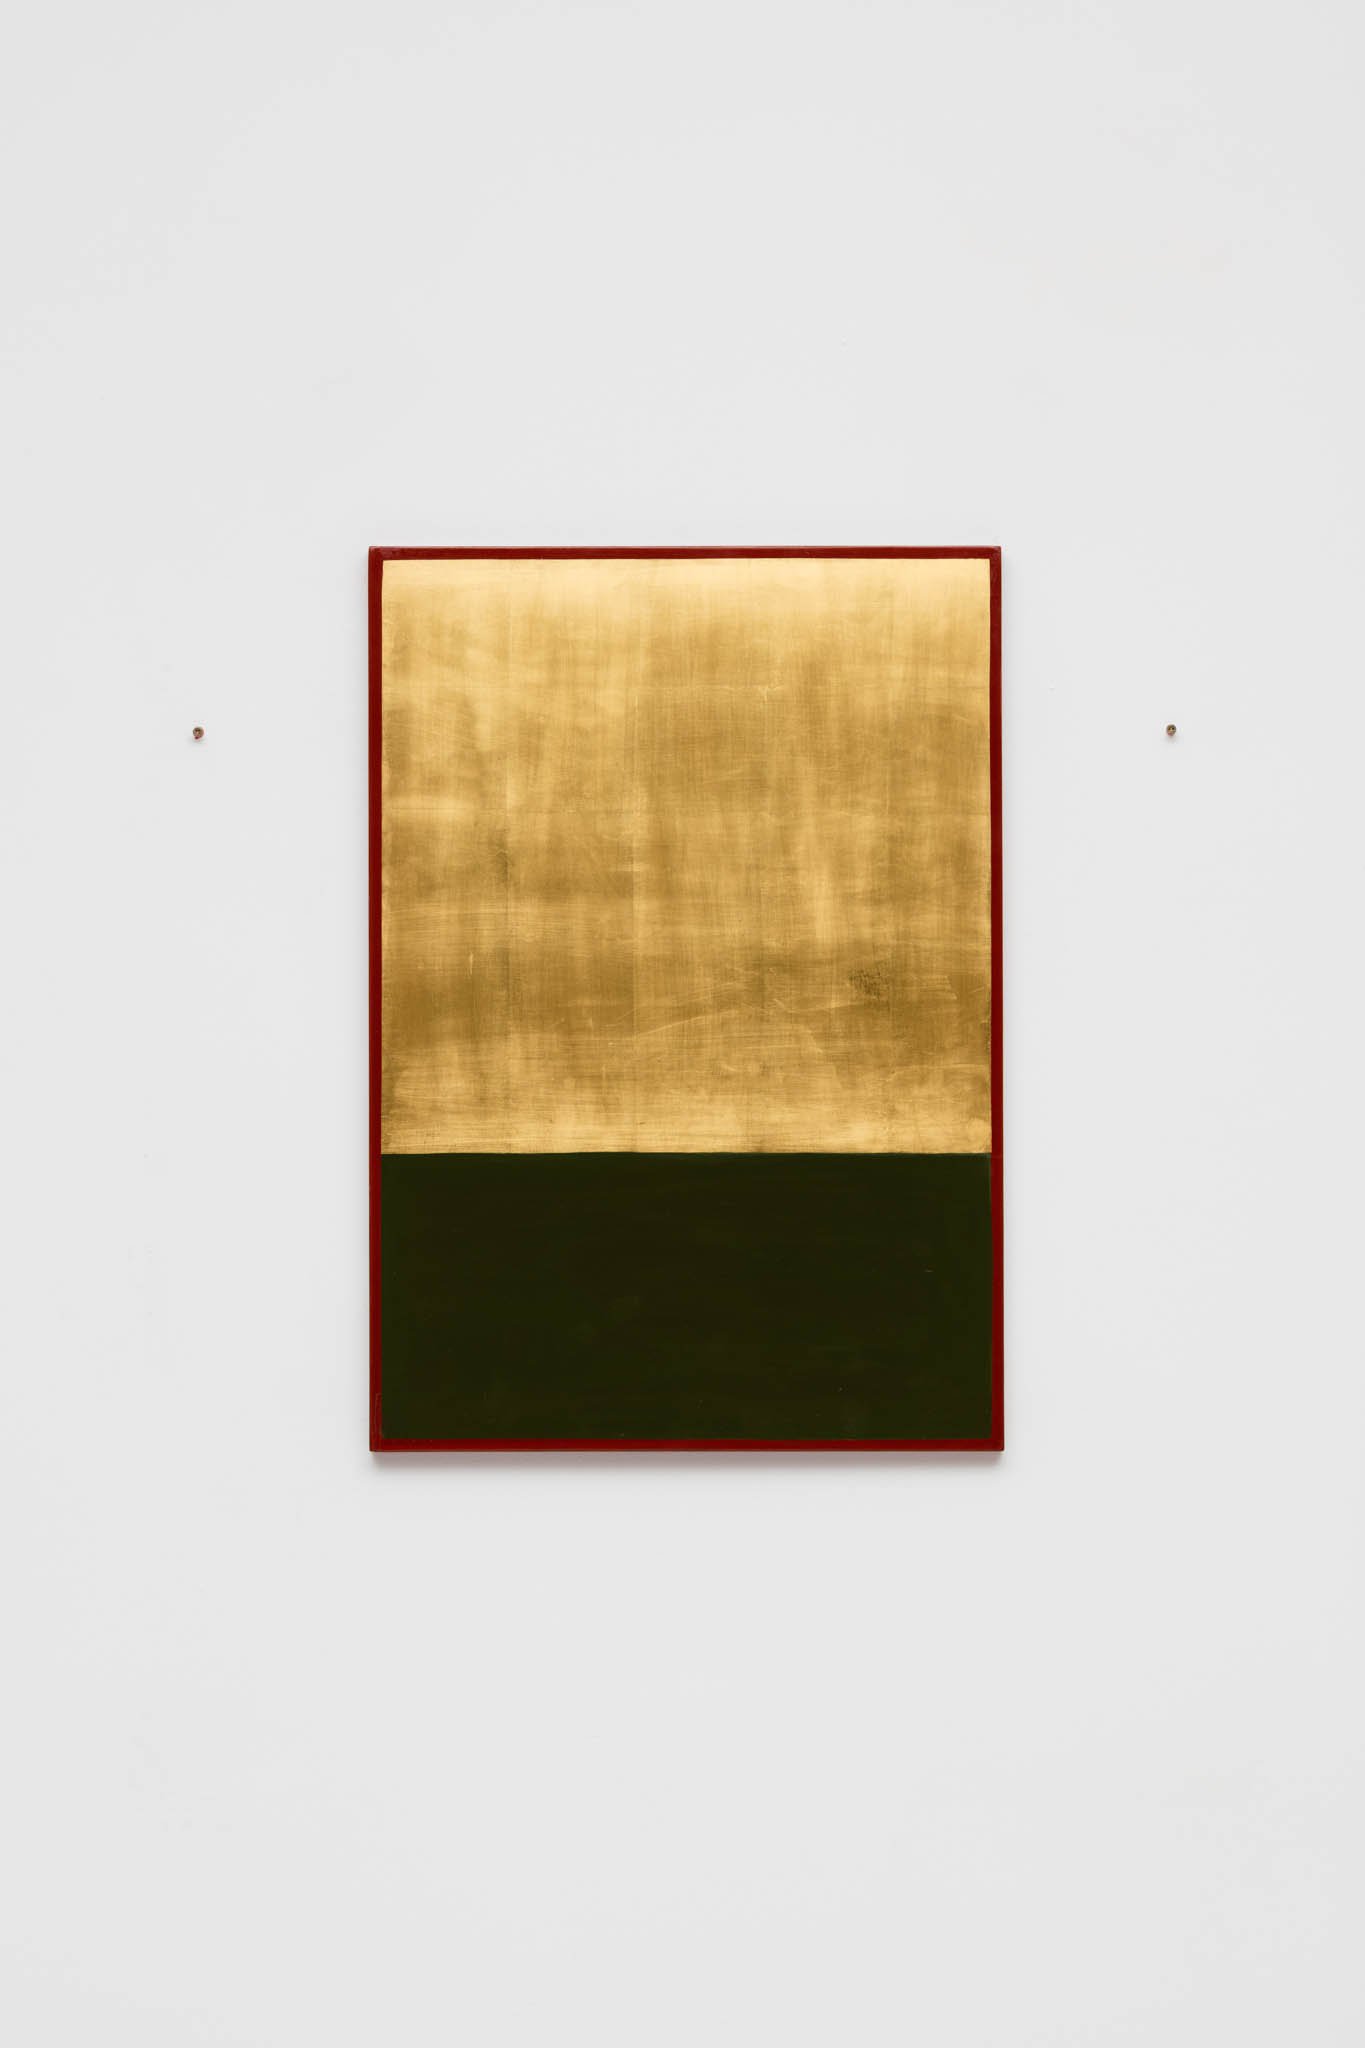 Christodoulos Panayiotou, Untitled, wood, paint, gold leaf, 70 x 49 cm, 2016